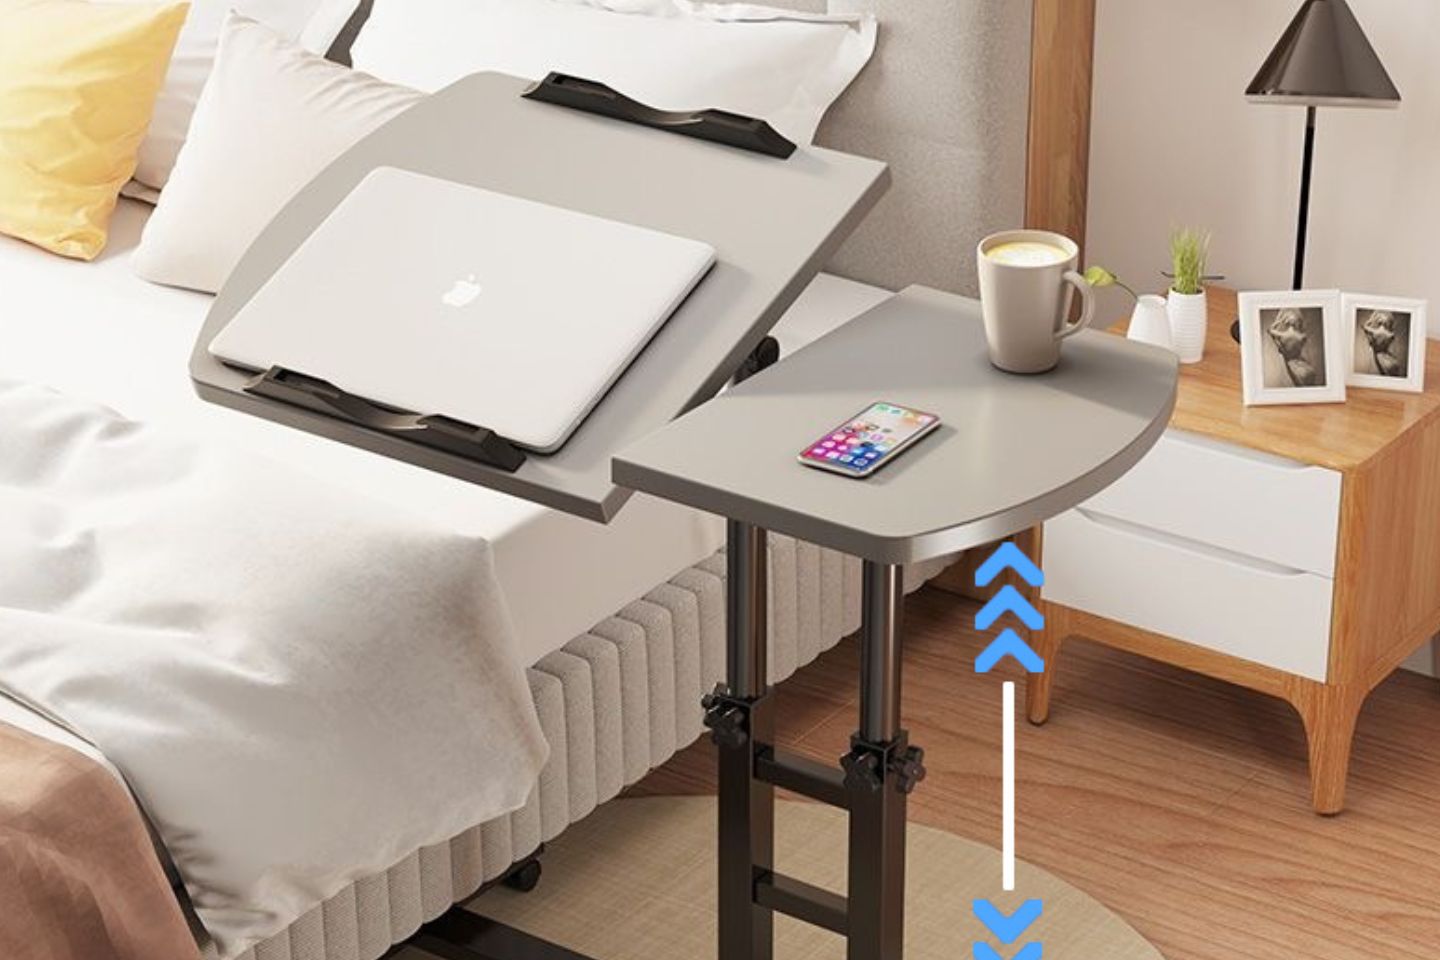 The Importance of a Bedside Table to a Healing Patient